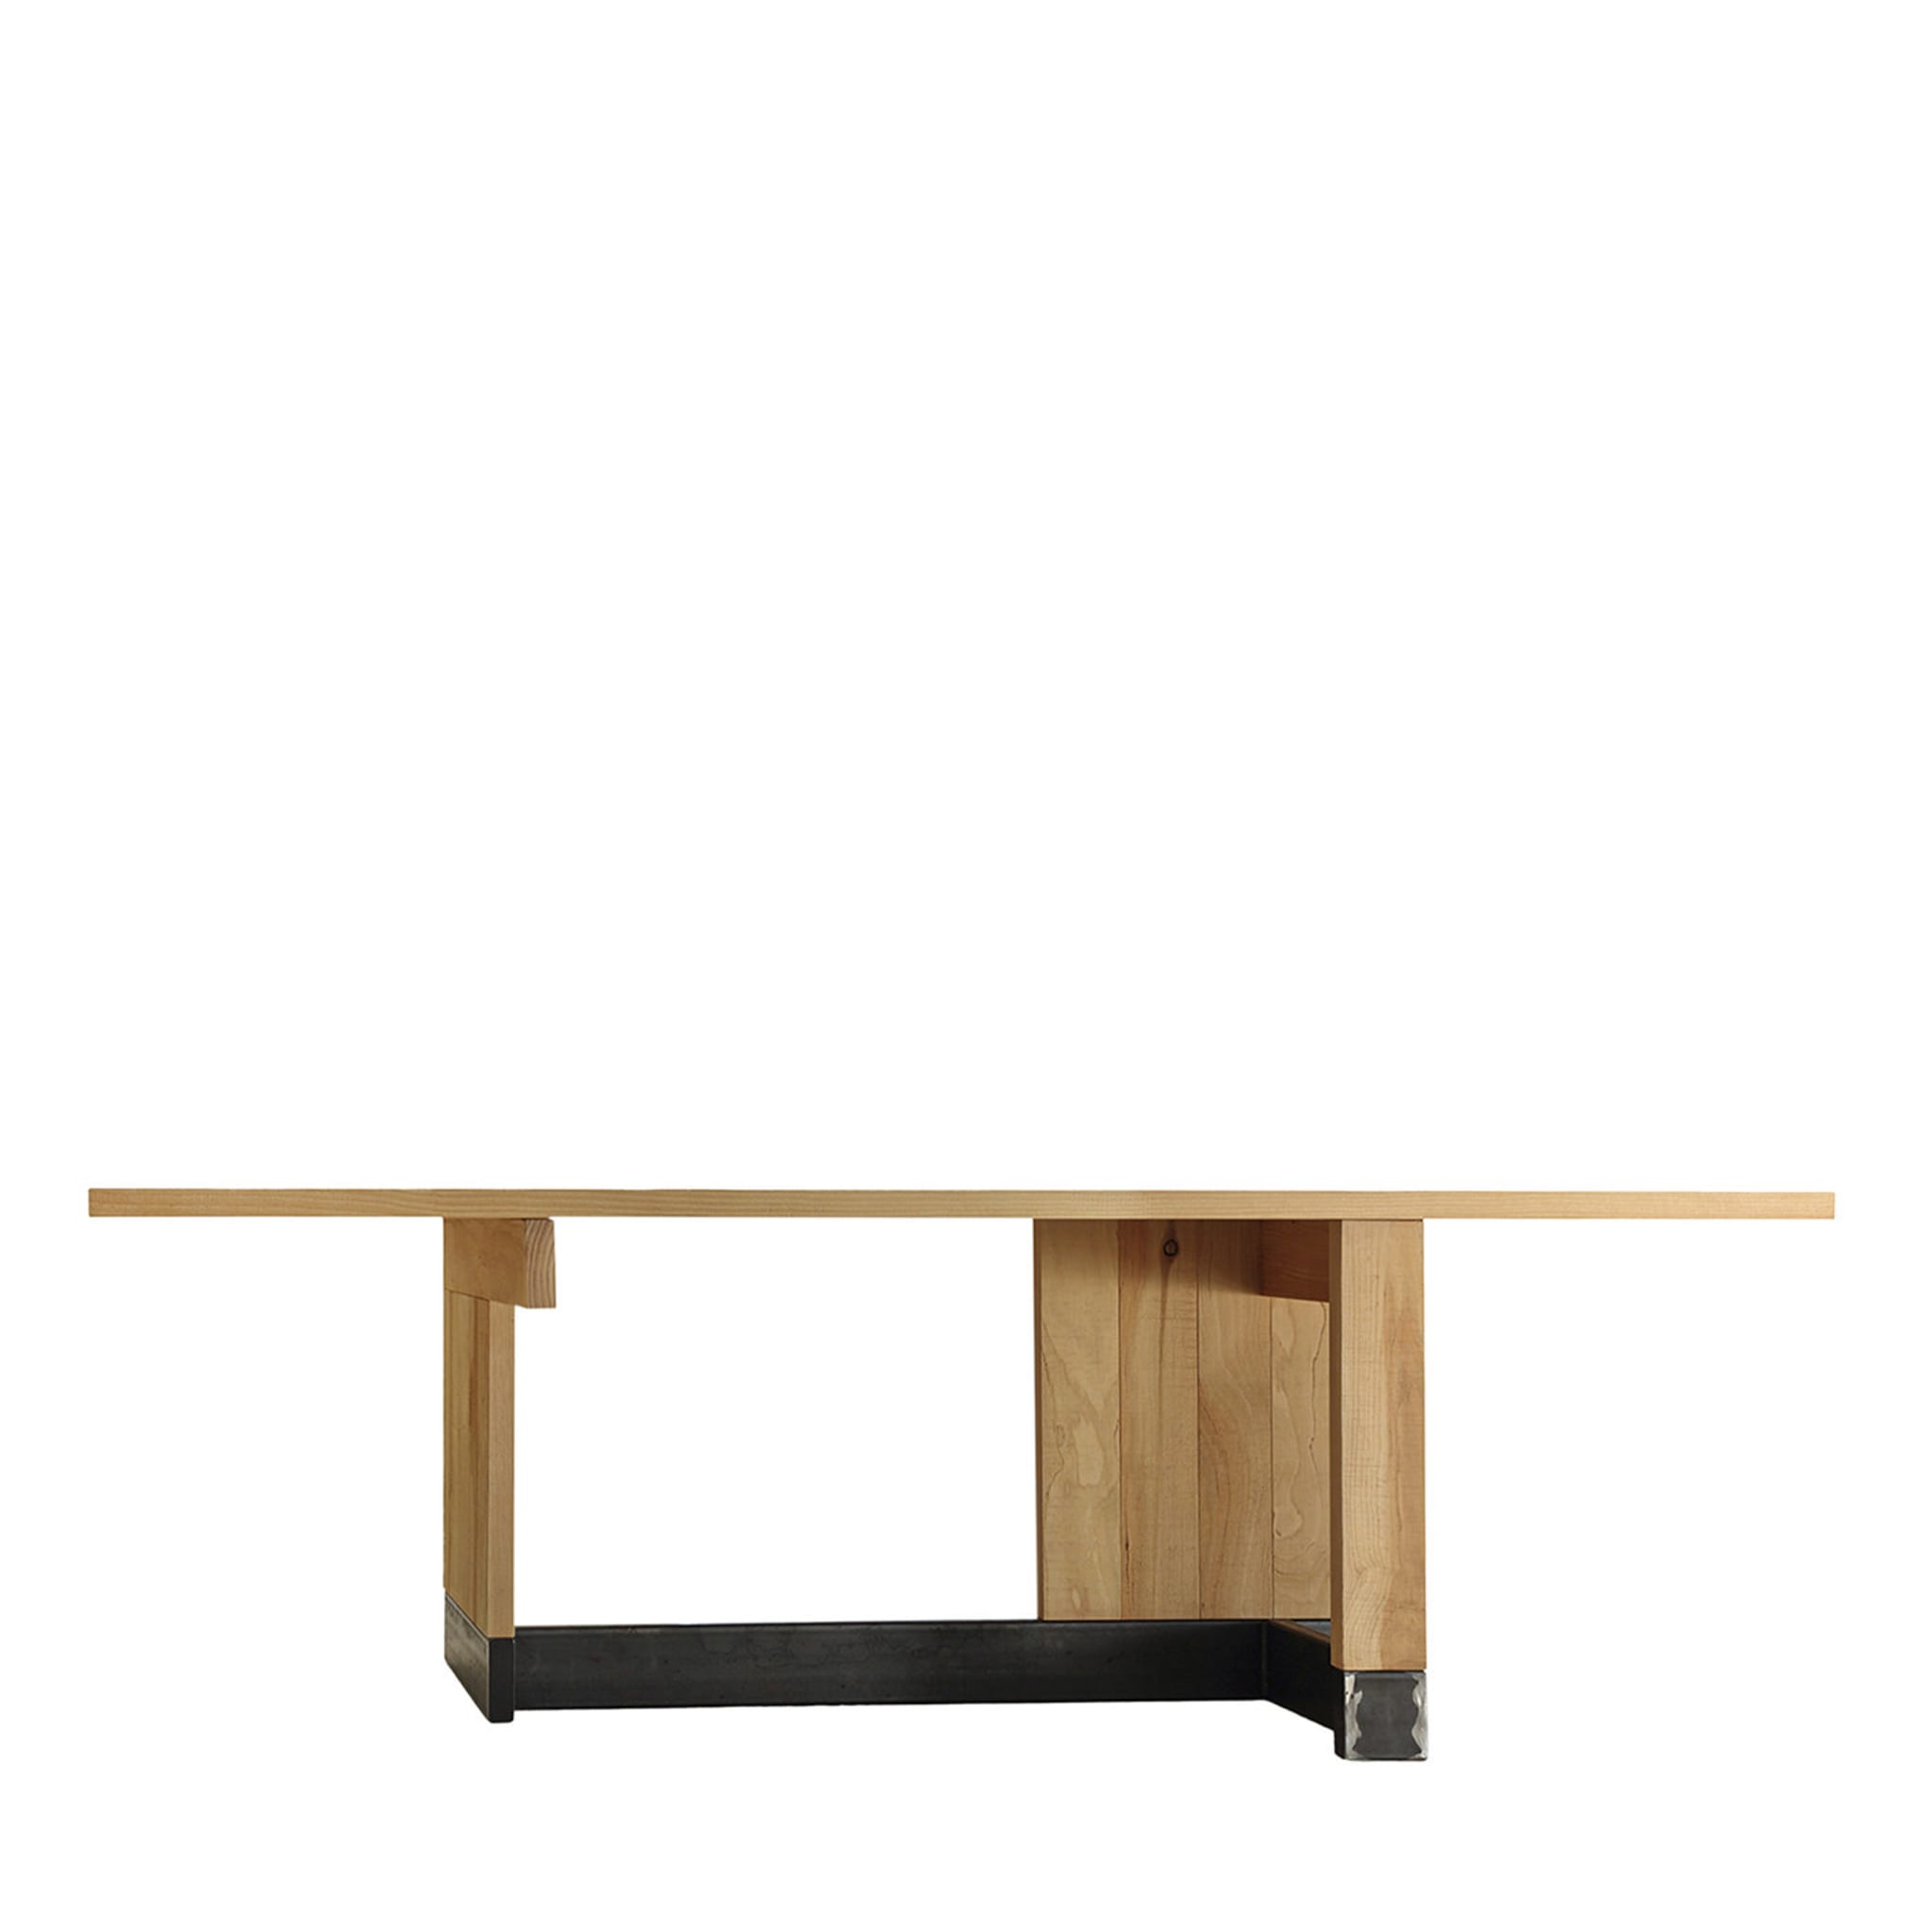 MiManca Table by Stefano Sessolo - Main view